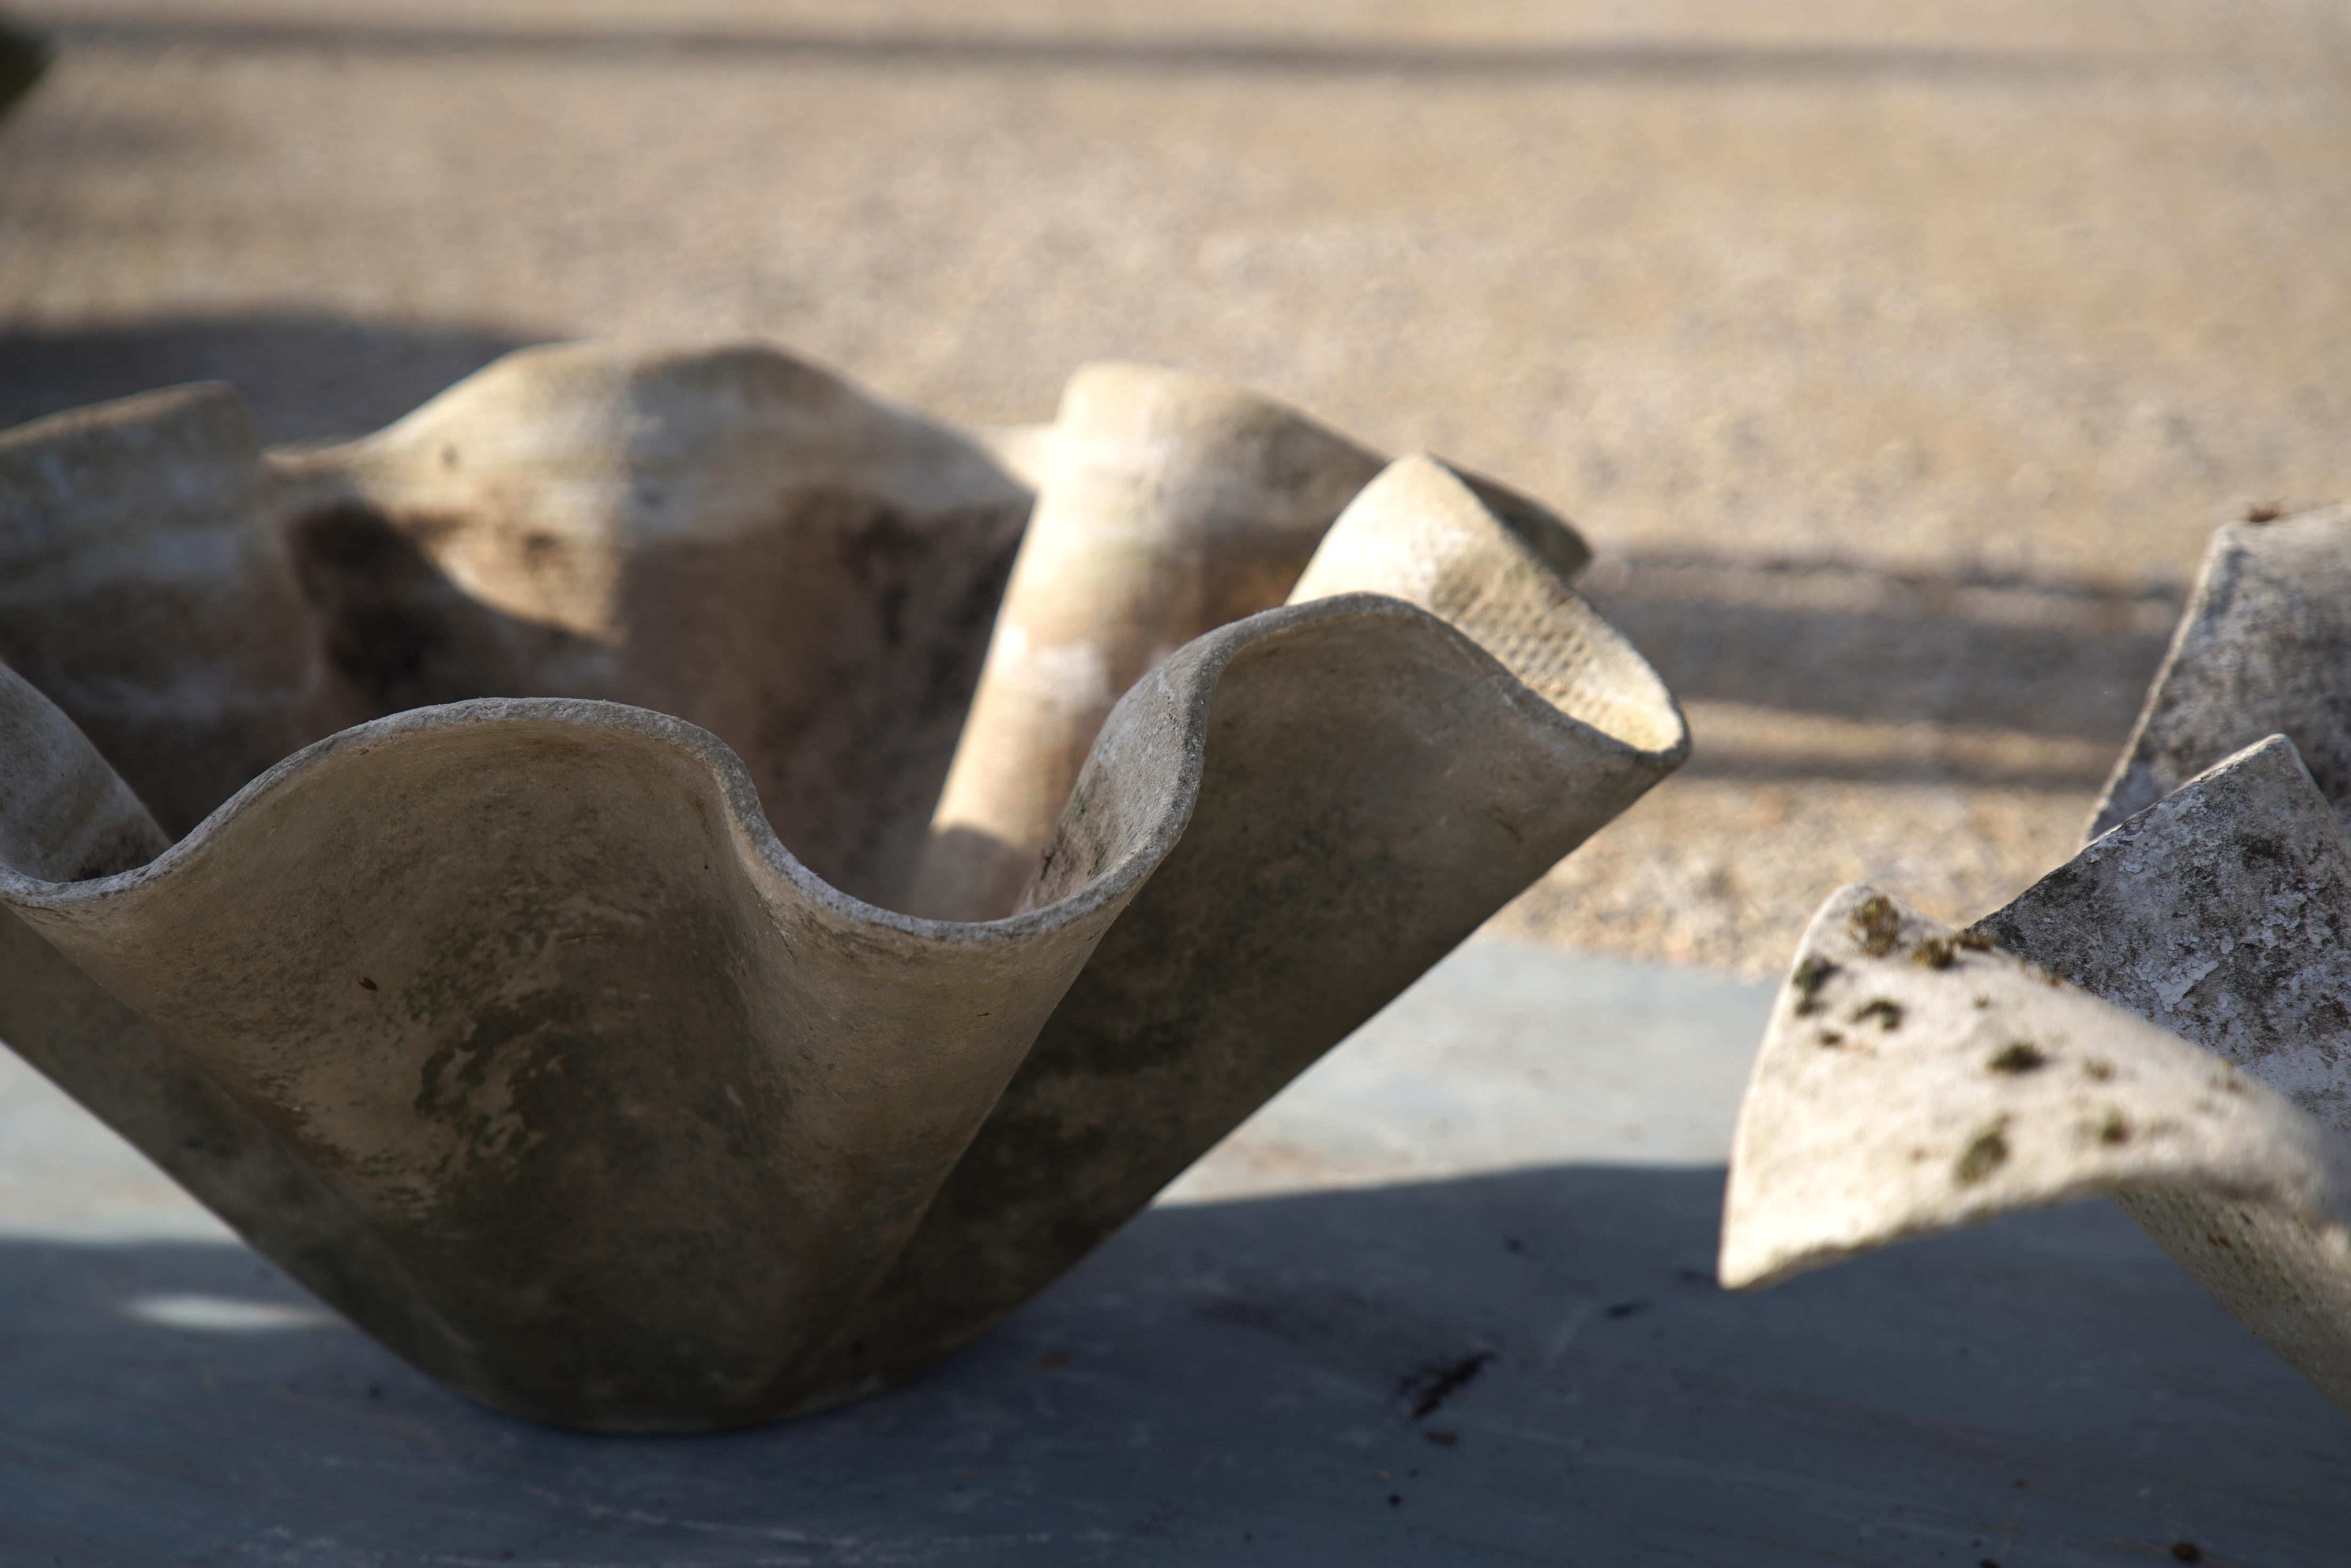 Exceptional sculptural garden planters designed by Willy Guhl for Eternit in Switzerland circa 1960s, often referred to as his 'Clam Shell' planters.

Resembling the architect's iconic elephant ear planters, this planter is made from fibrous cement